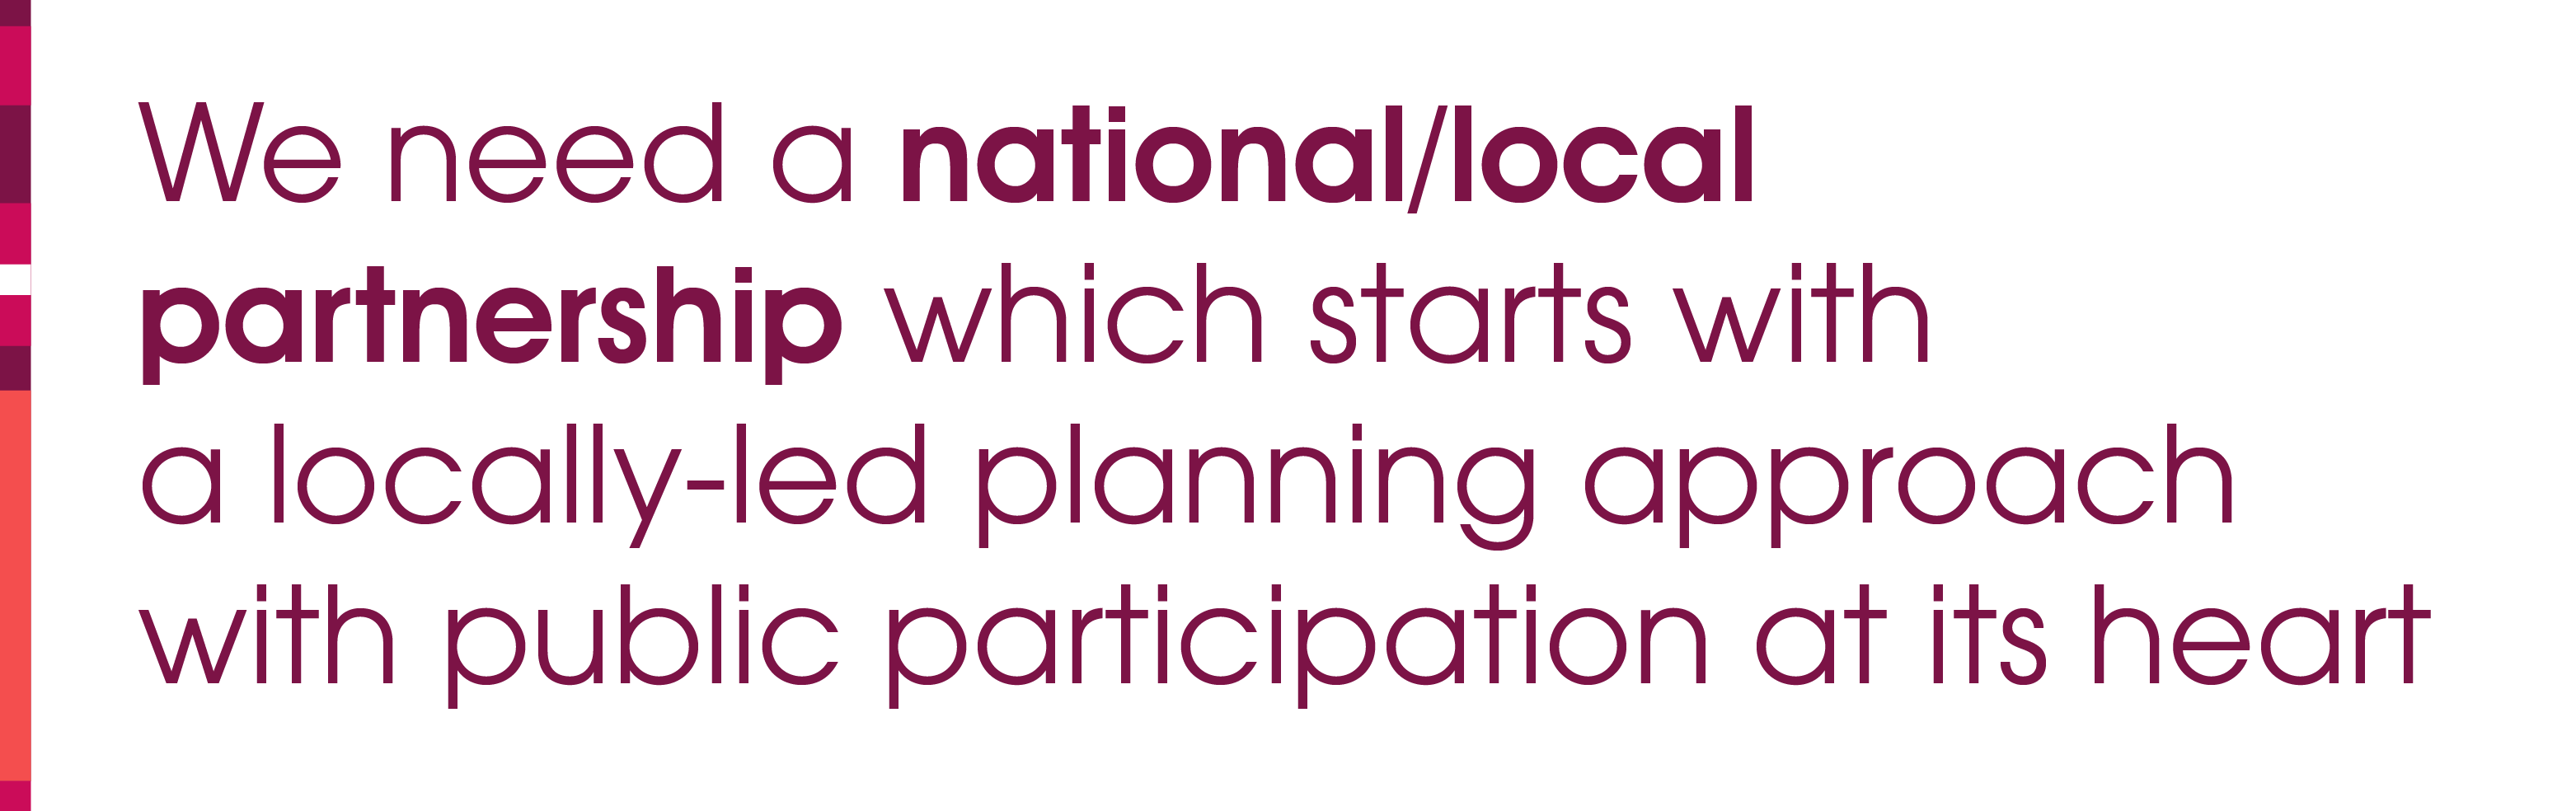 We need a national/local partnership which starts with a locally-led planning approach with public participation at its heart.